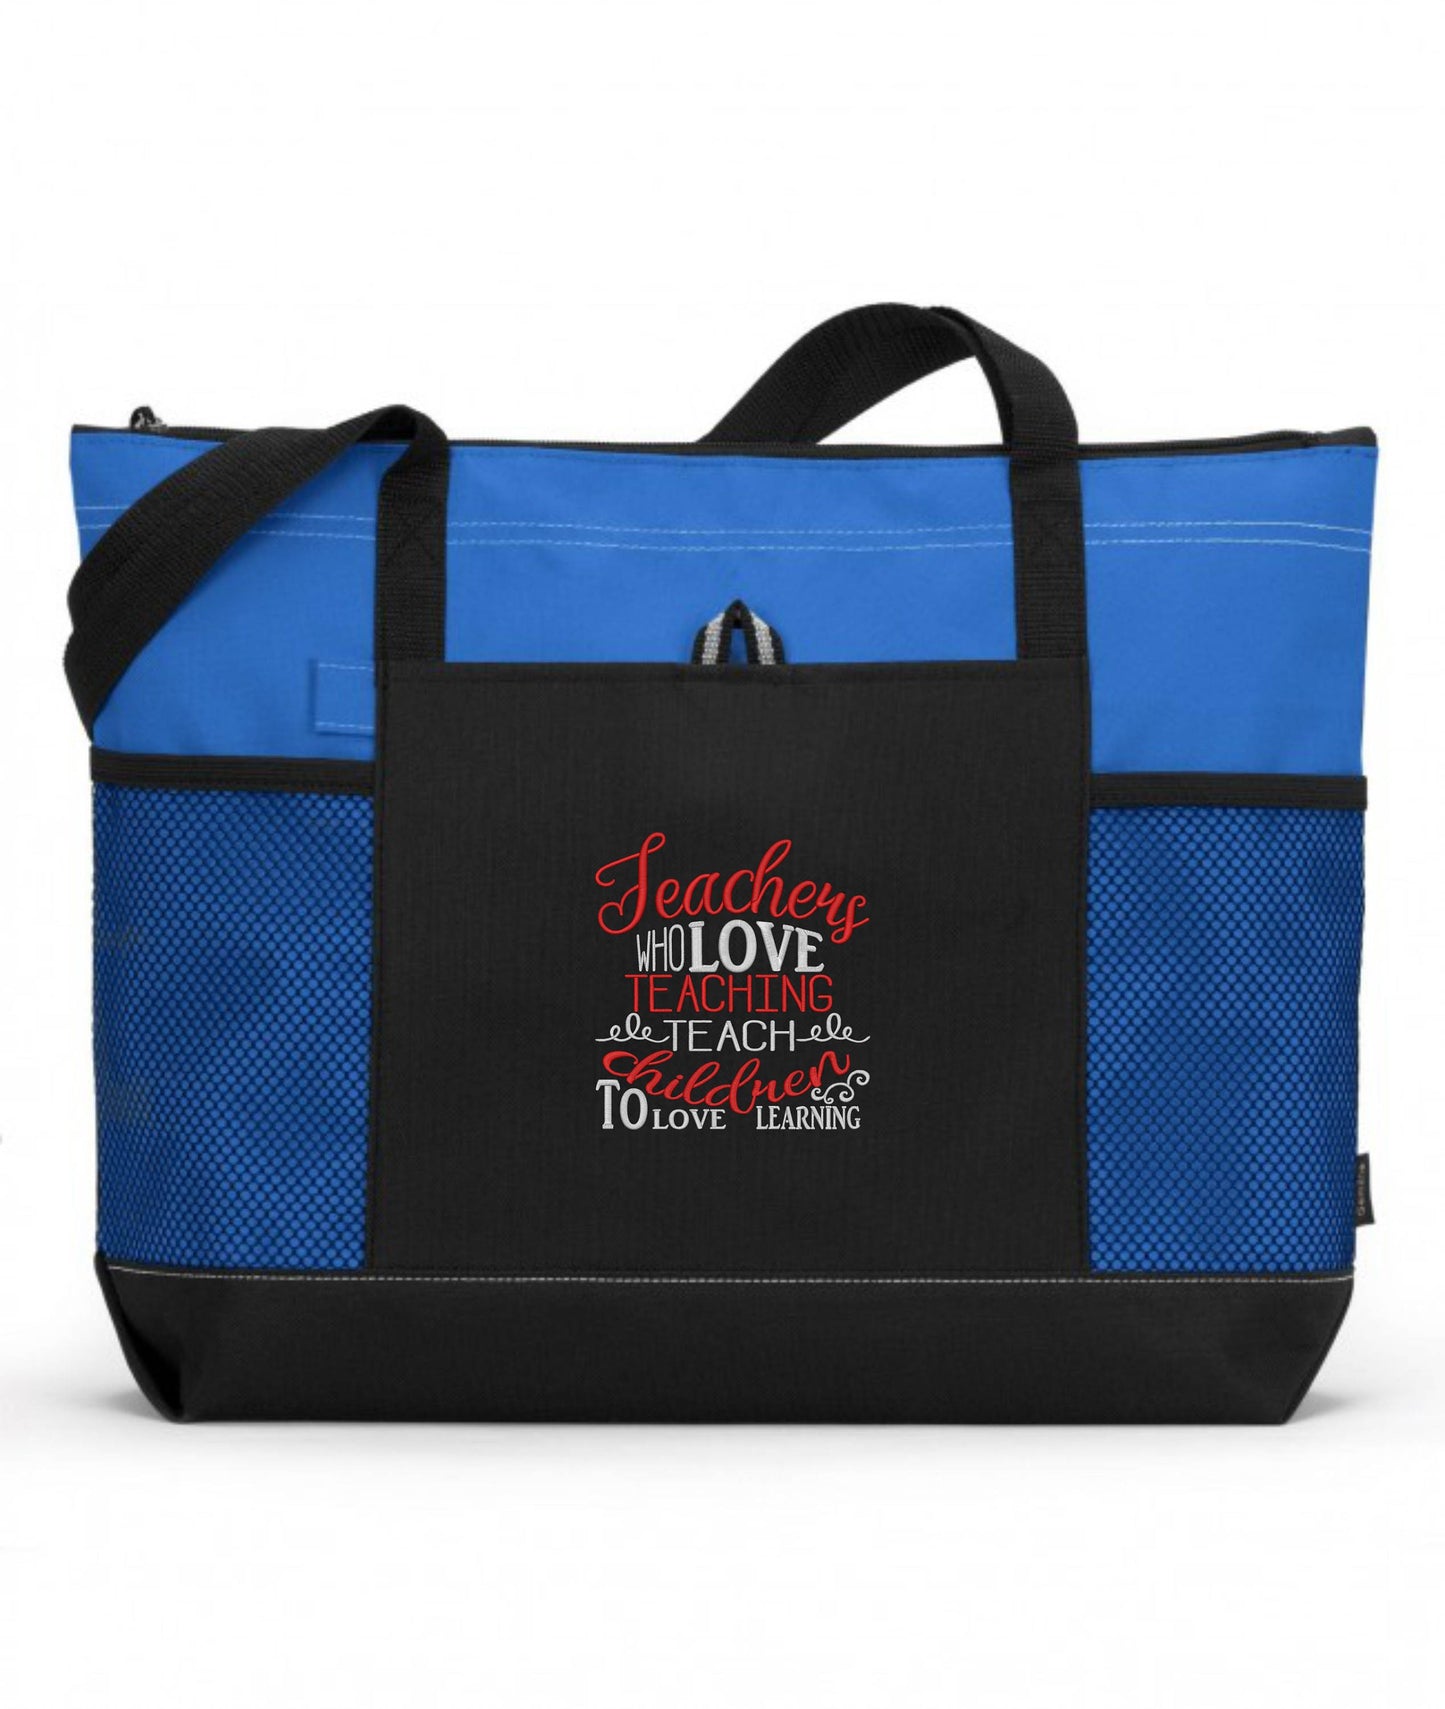 Teachers Who Love Teaching Teach Children To Love Learning Embroidered Tote Bag